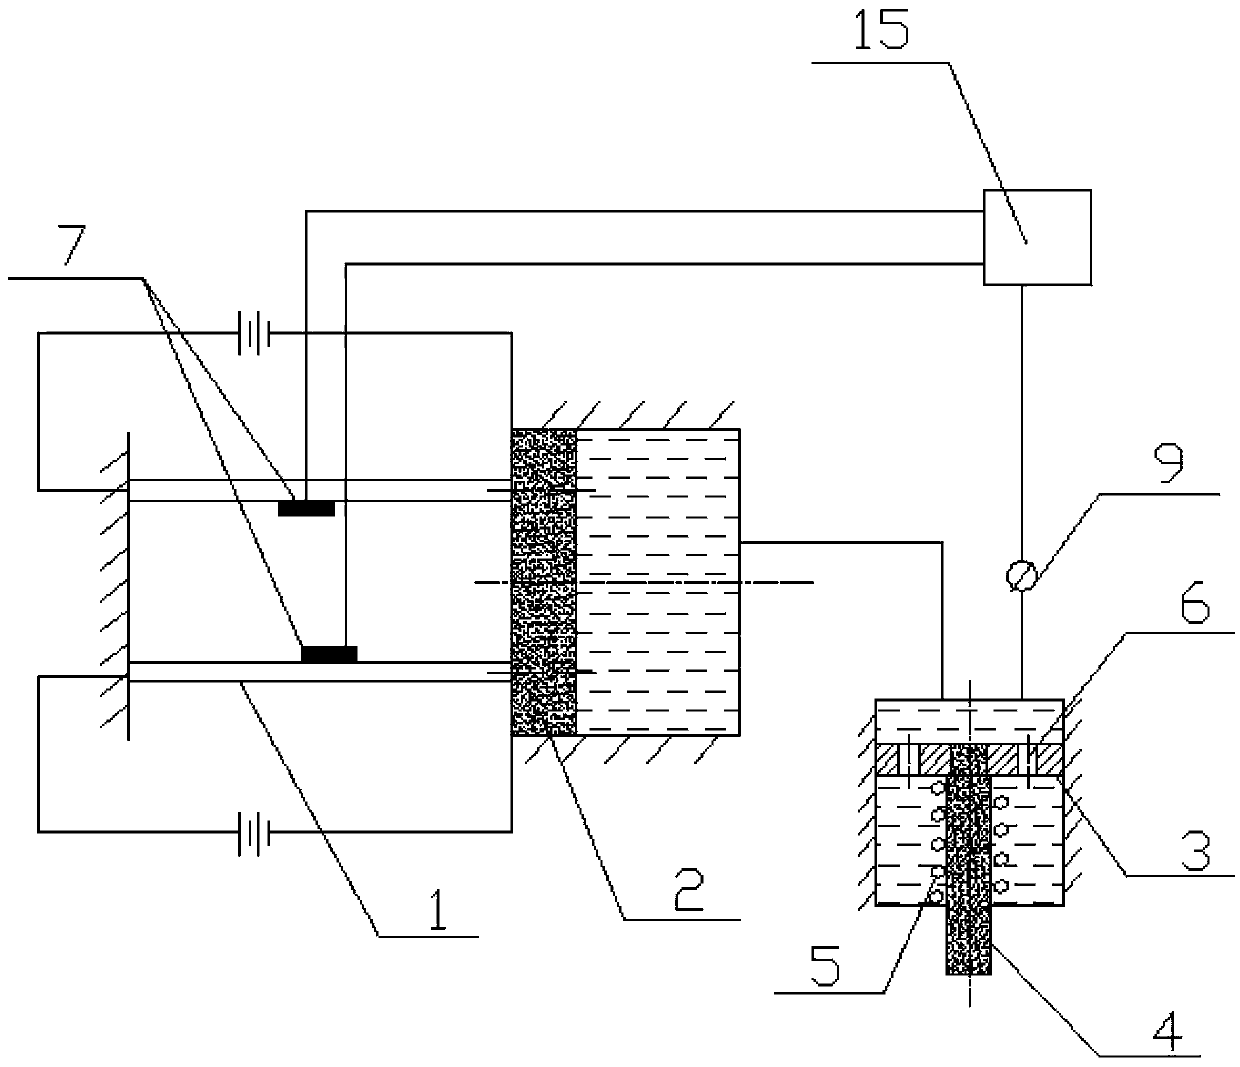 A self-locking clamping device based on thermally induced linear expansion